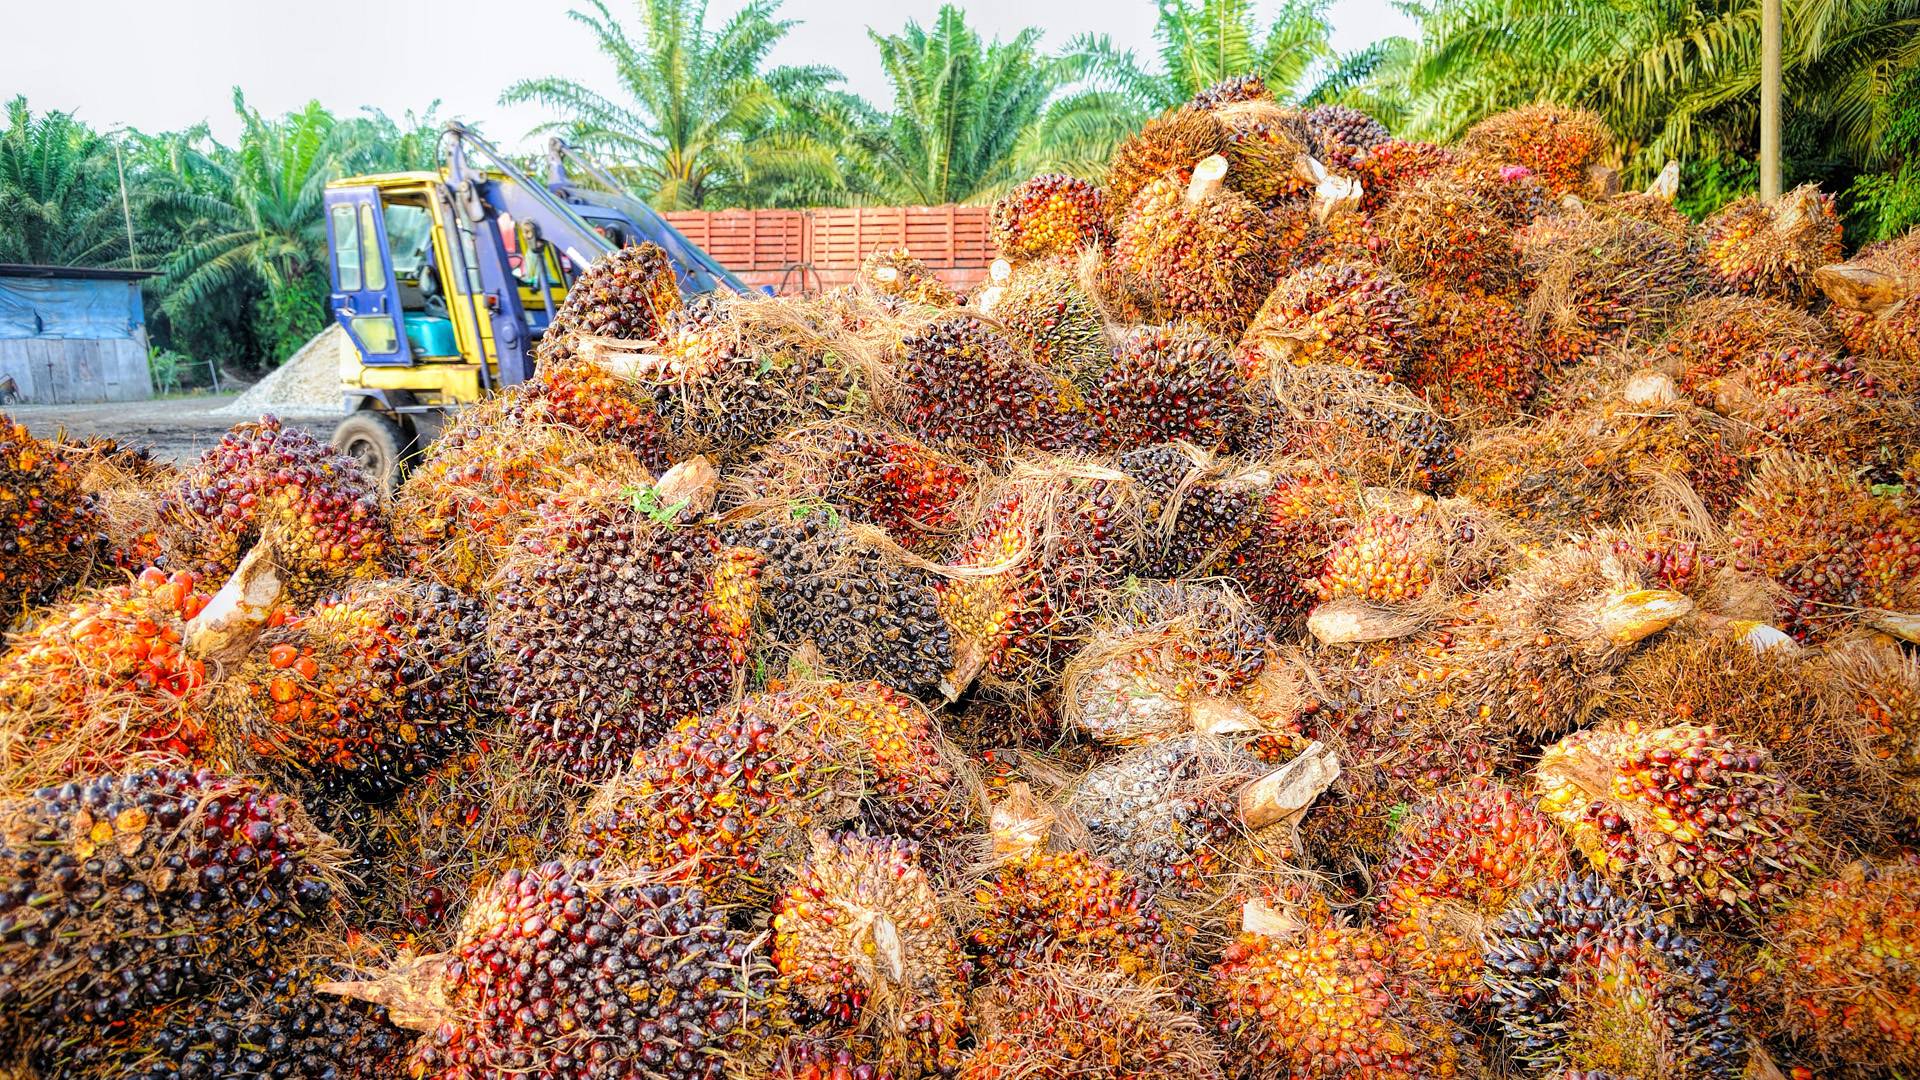 Palm oil fruits in Indonesia